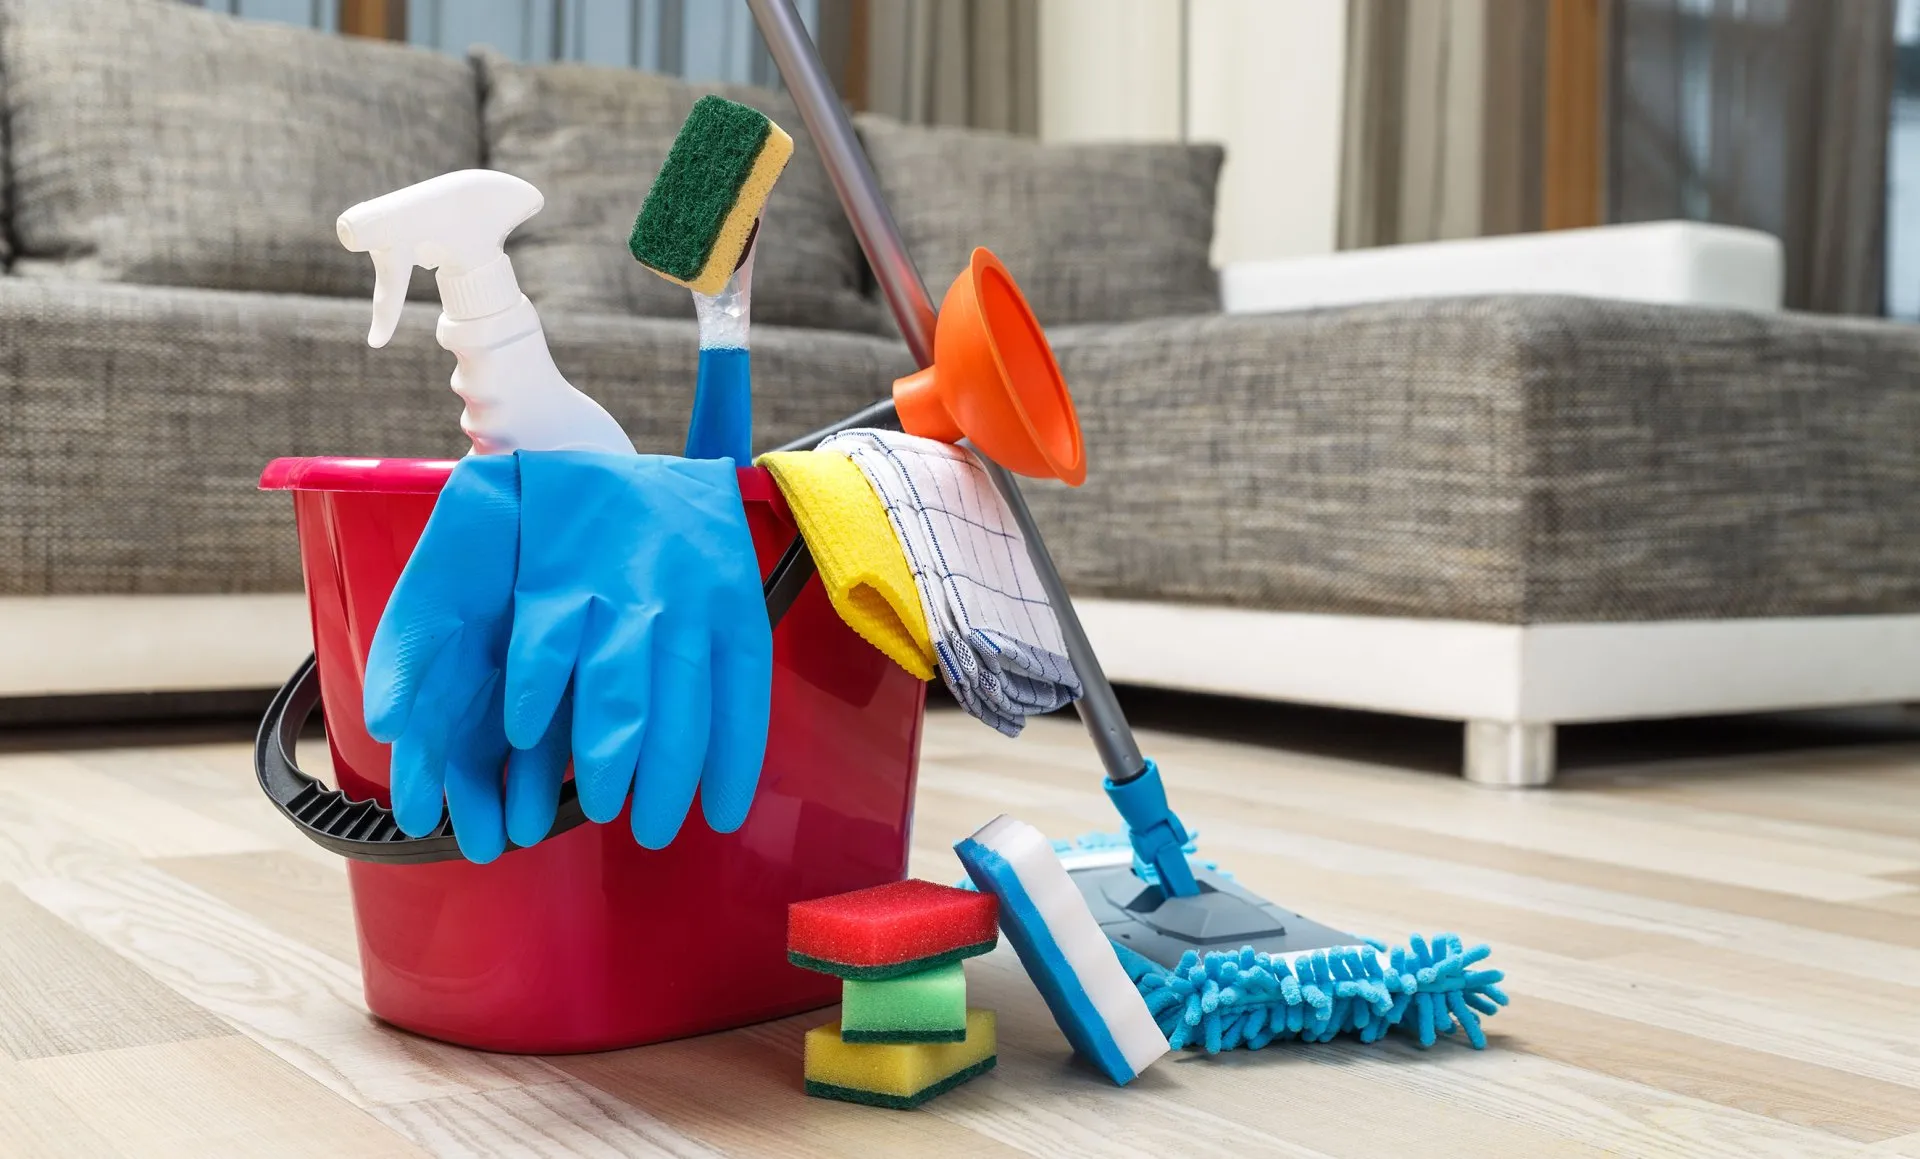 Home Harmony The Art and Science of Domestic Cleaning